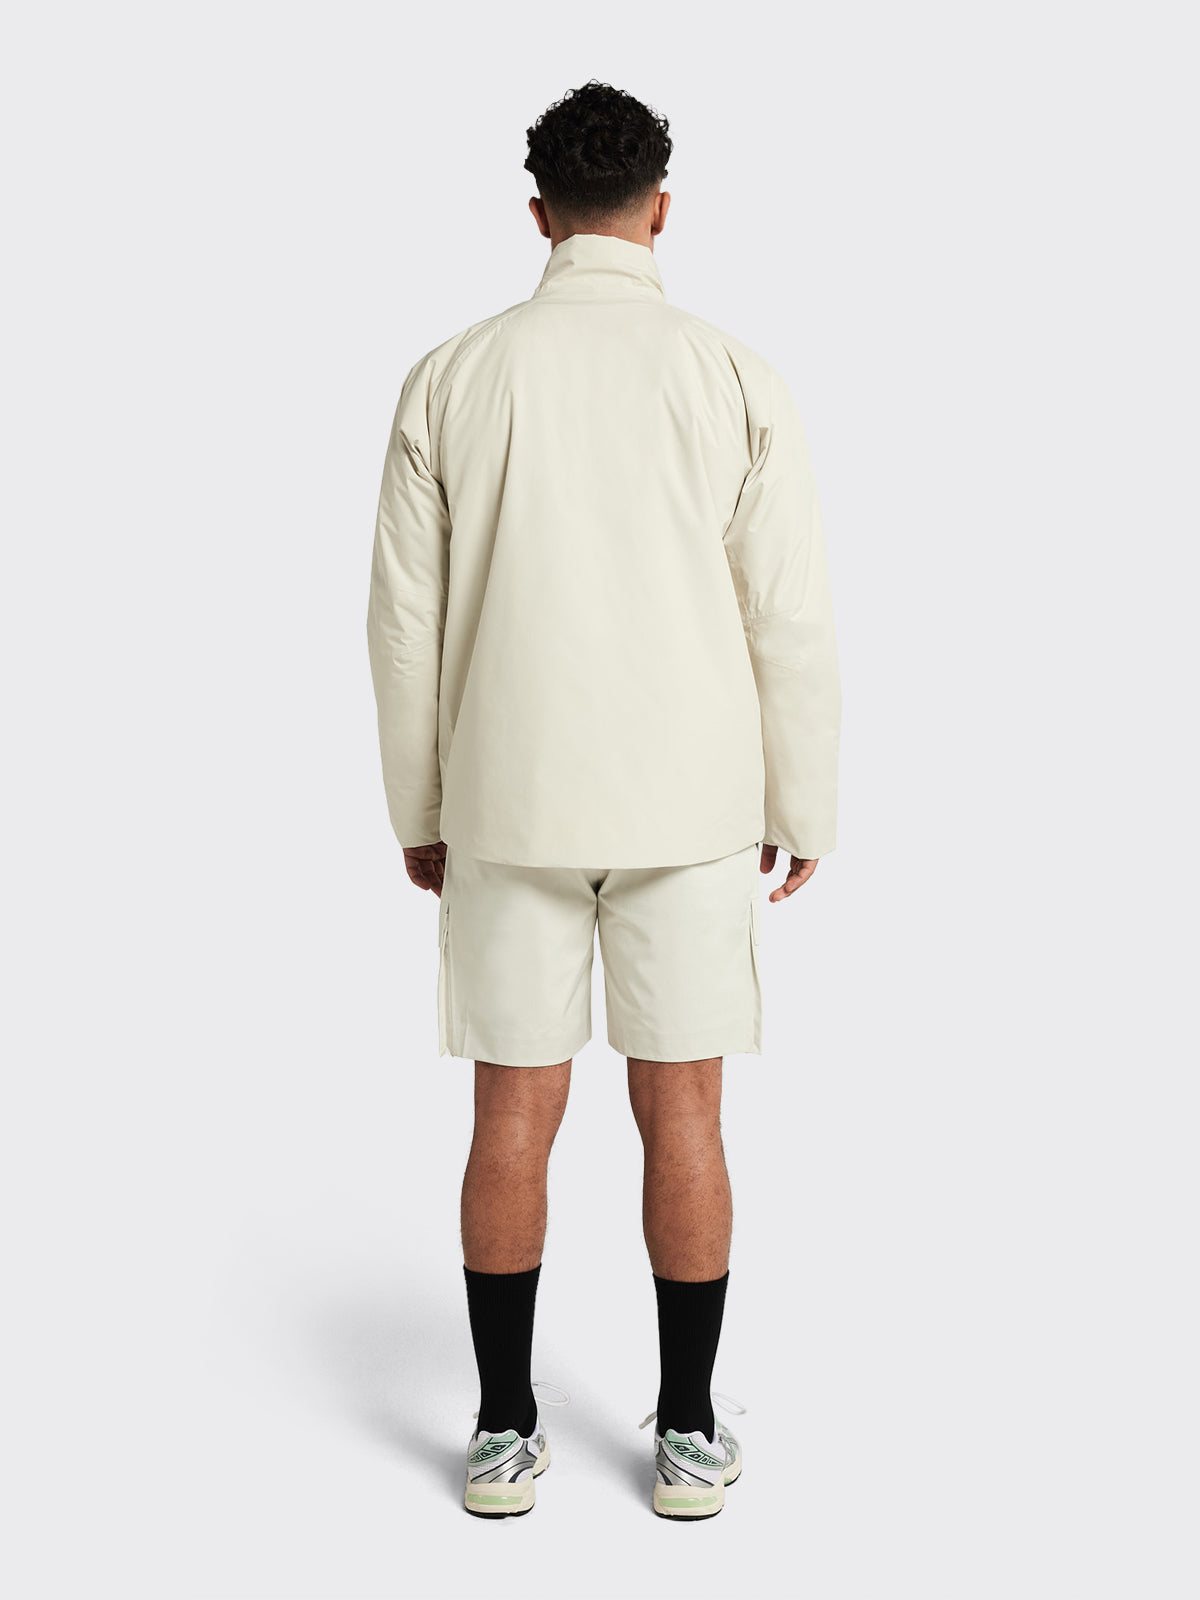 Man wearing Flø RS jacket from Blæst in the color Birch